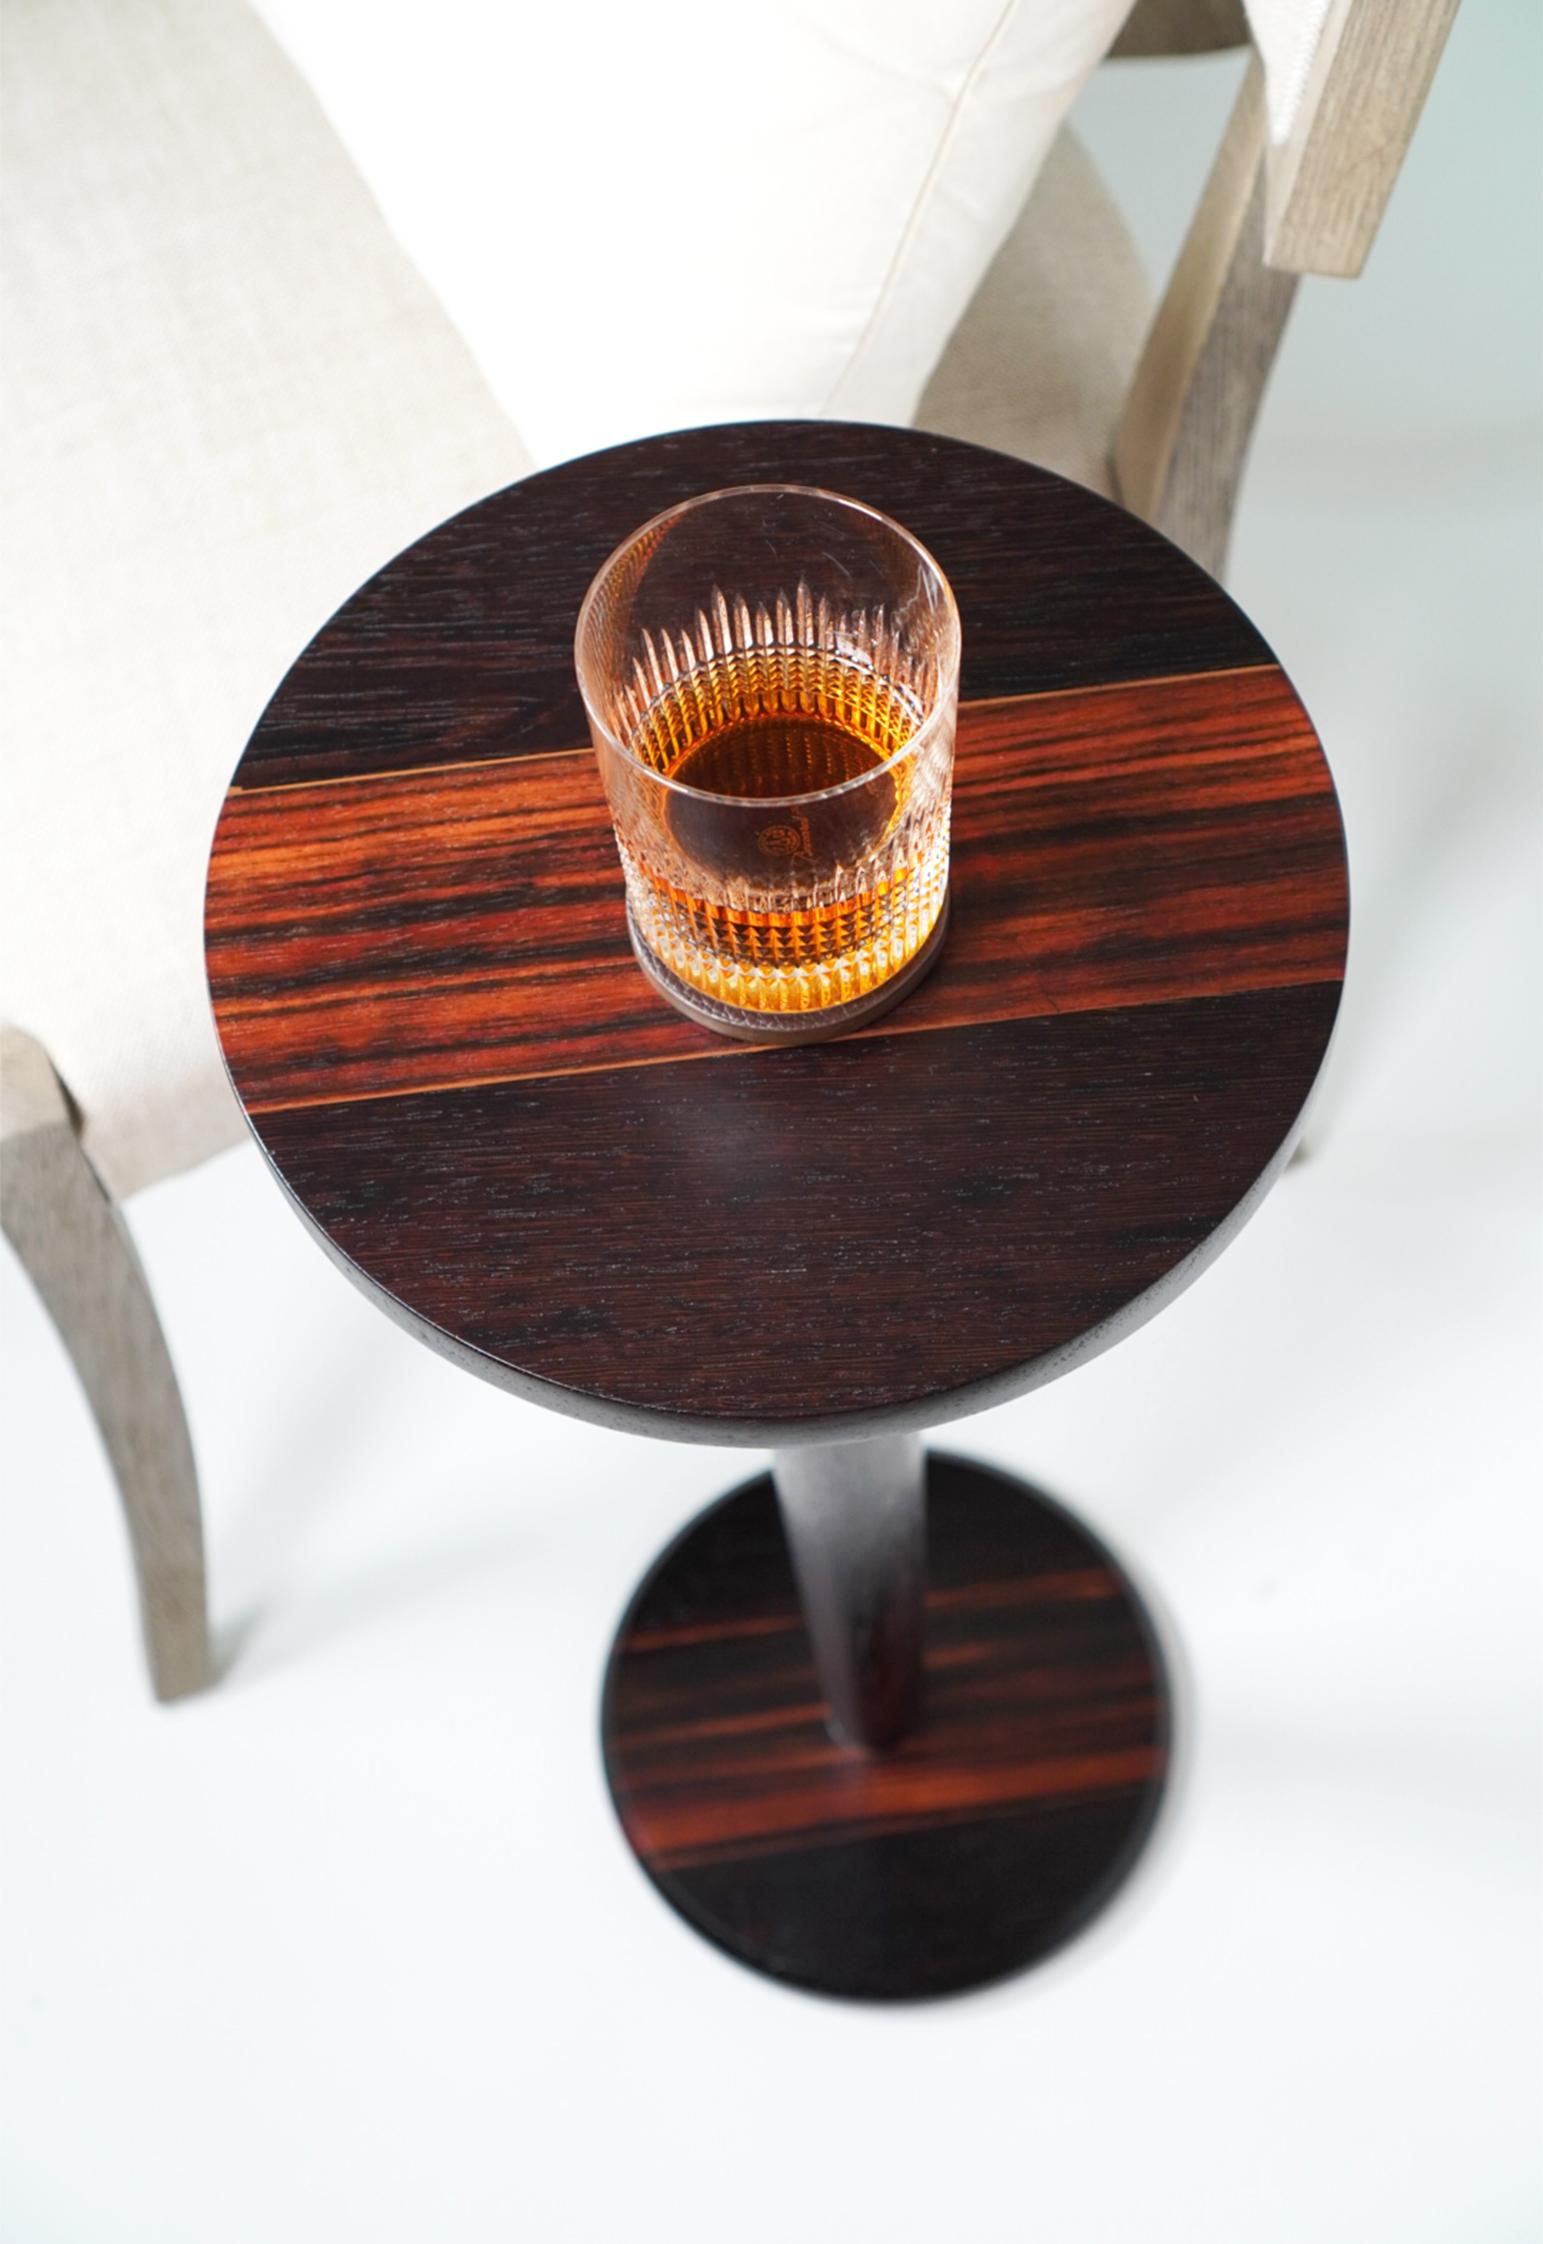 American 21st Century Mid-Century Modern Inspired Wenge and Macassar Ebony Cocktail Table For Sale